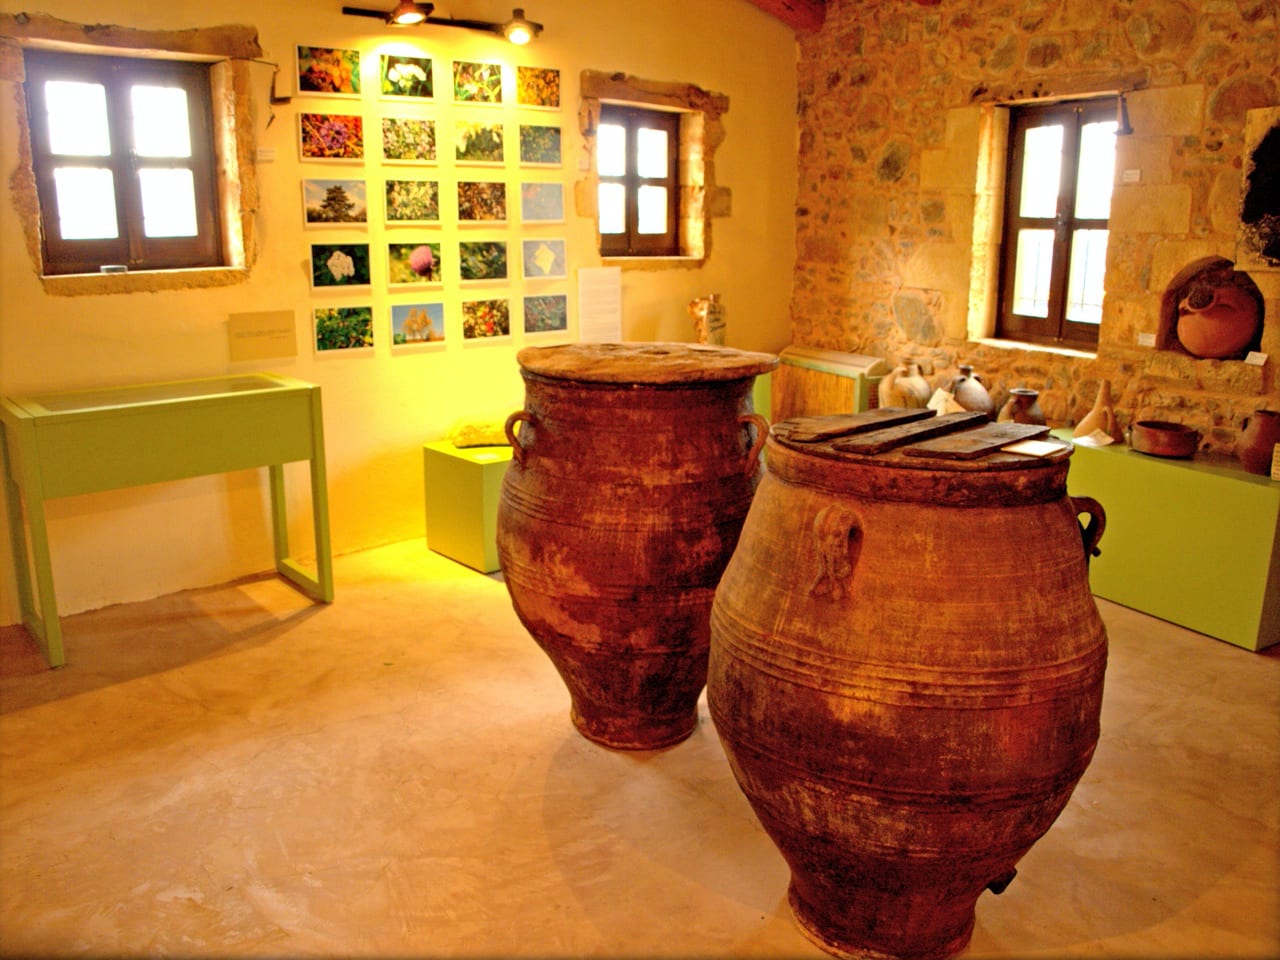 The Olive Tree Museum of Vouves, Monumental Olive Tree of Vouves, Pano Vouves olive museum, West Crete activities, best activities chania crete